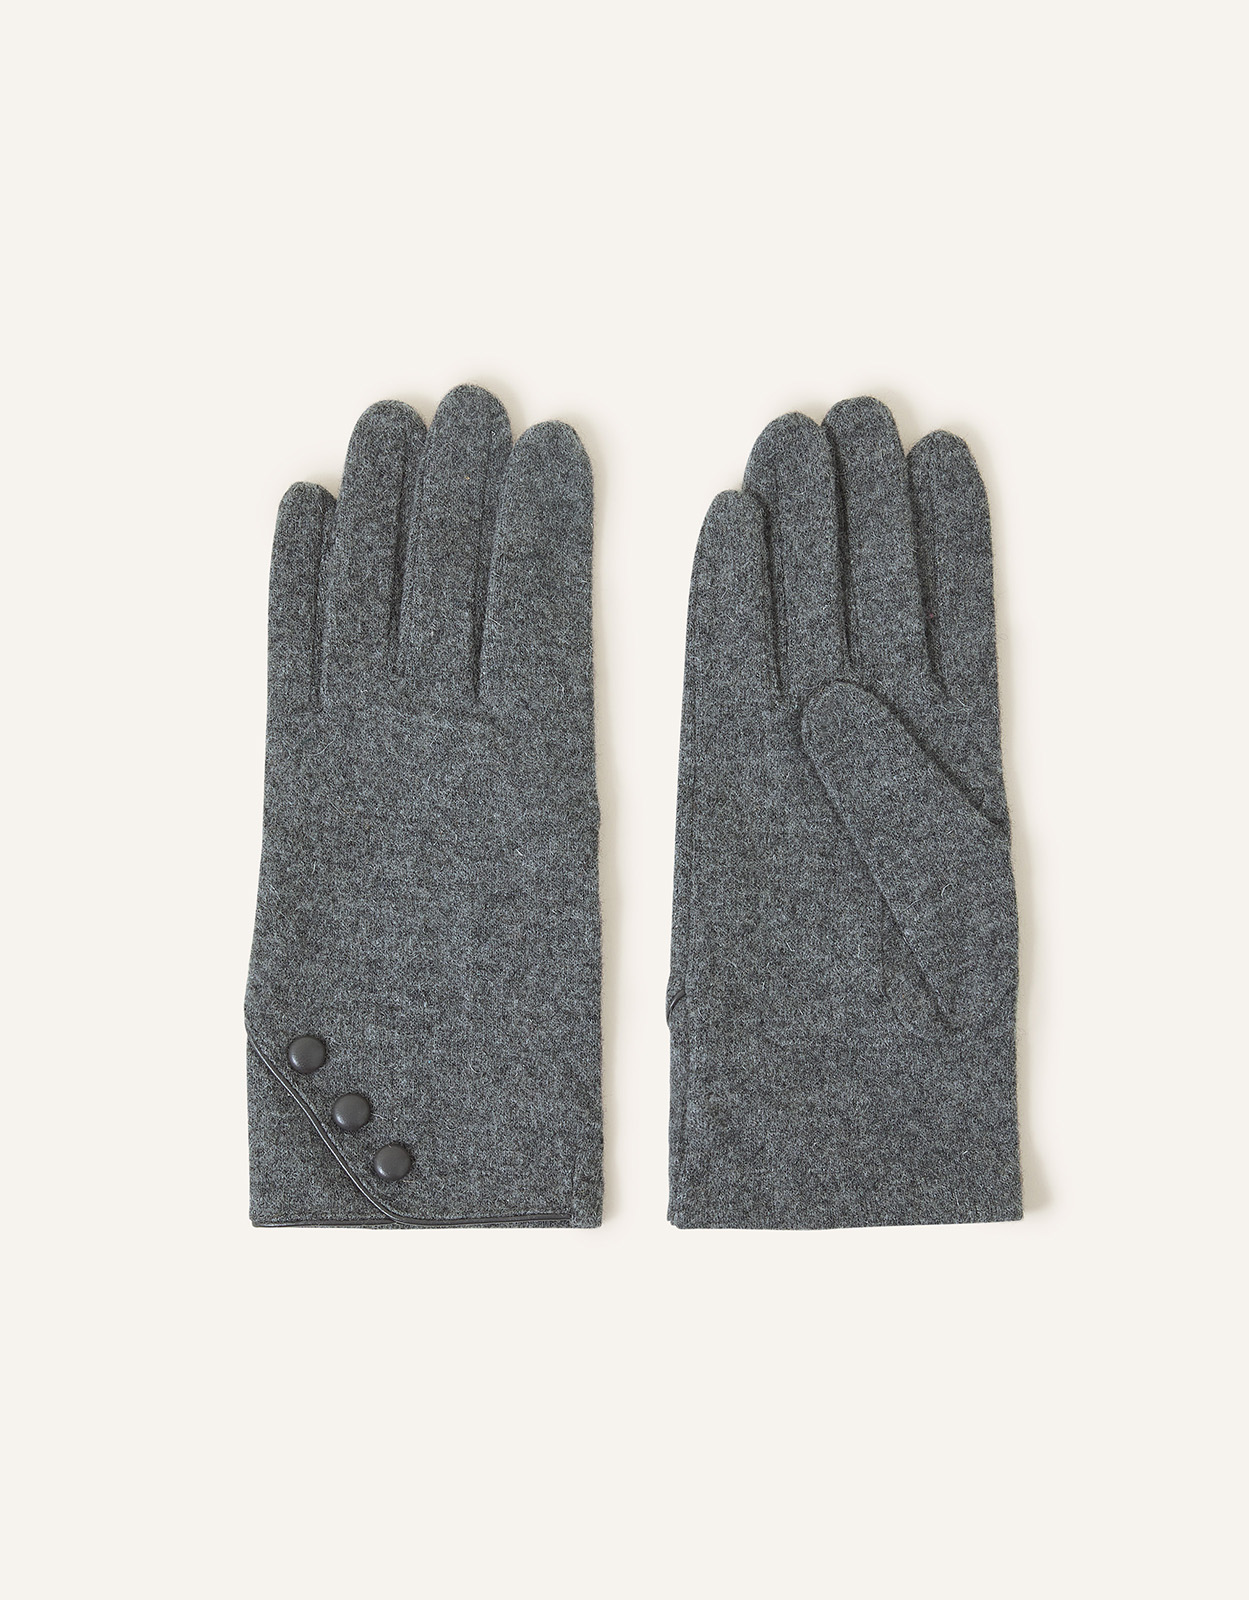 Accessorize Touchscreen Button Gloves in Wool Blend Grey, Size: One Size